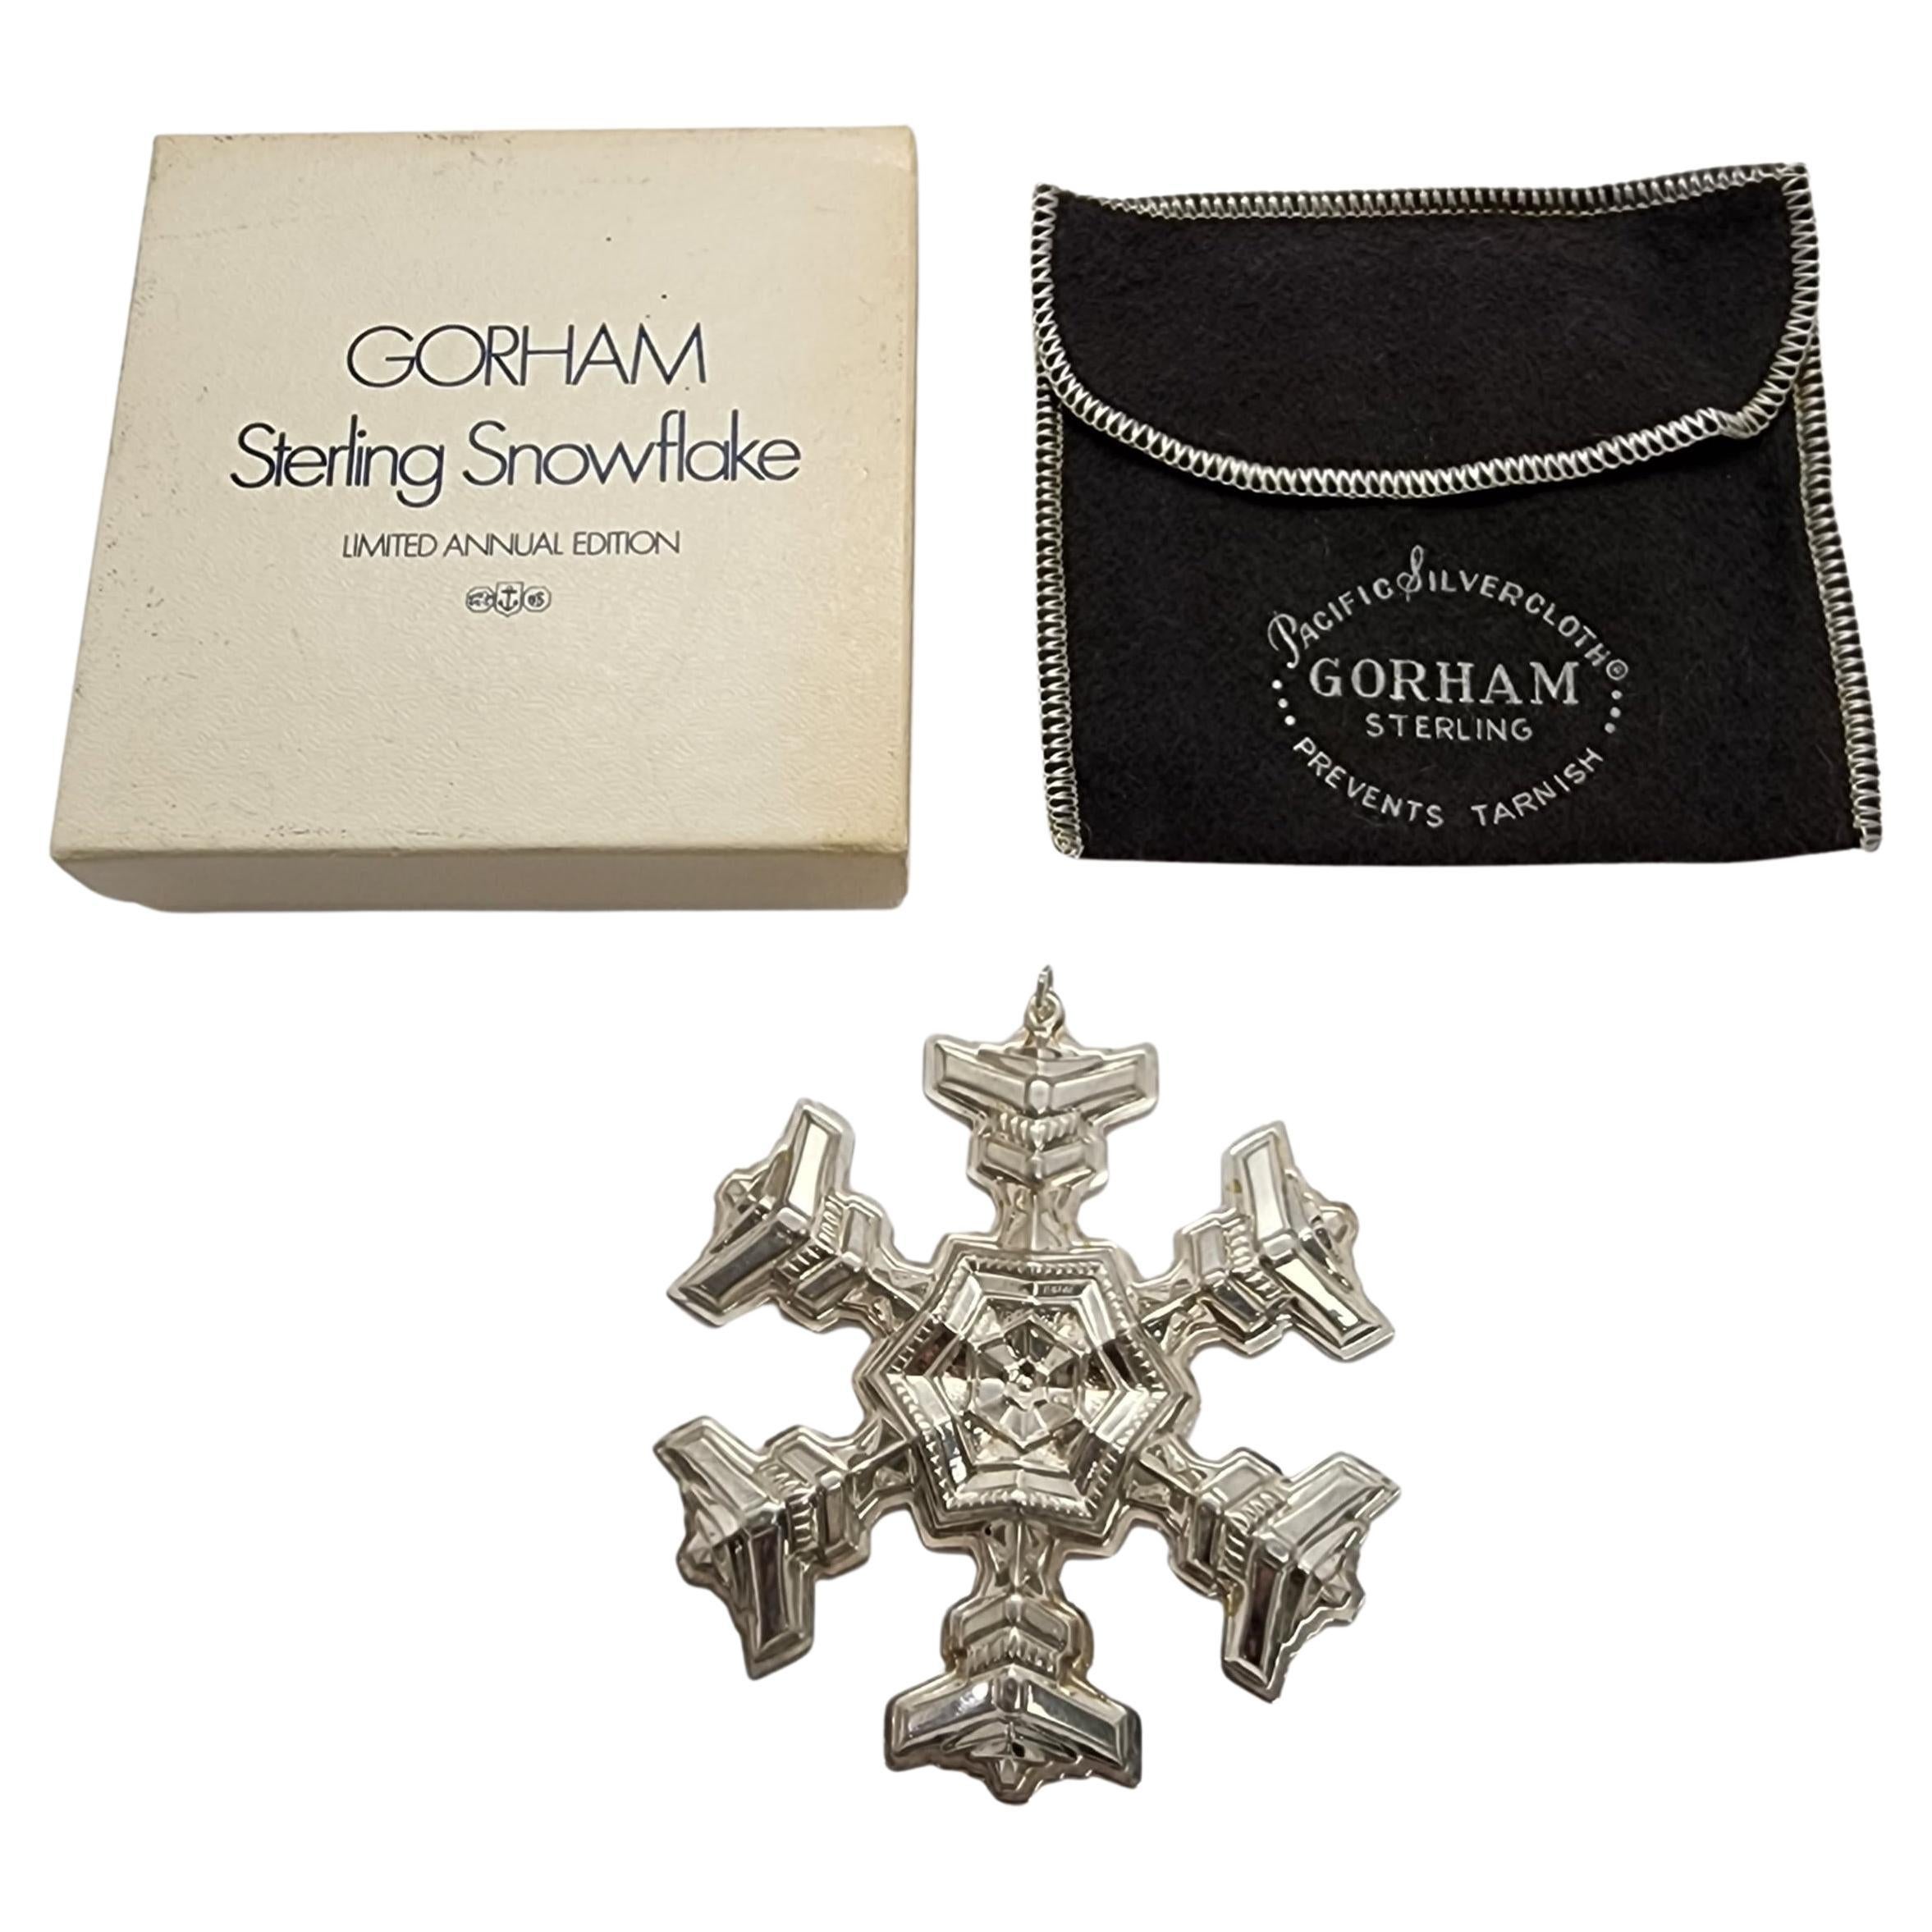 Gorham Sterling Silver 1977 Snowflake Ornament w/Box & Pouch #15822 For Sale